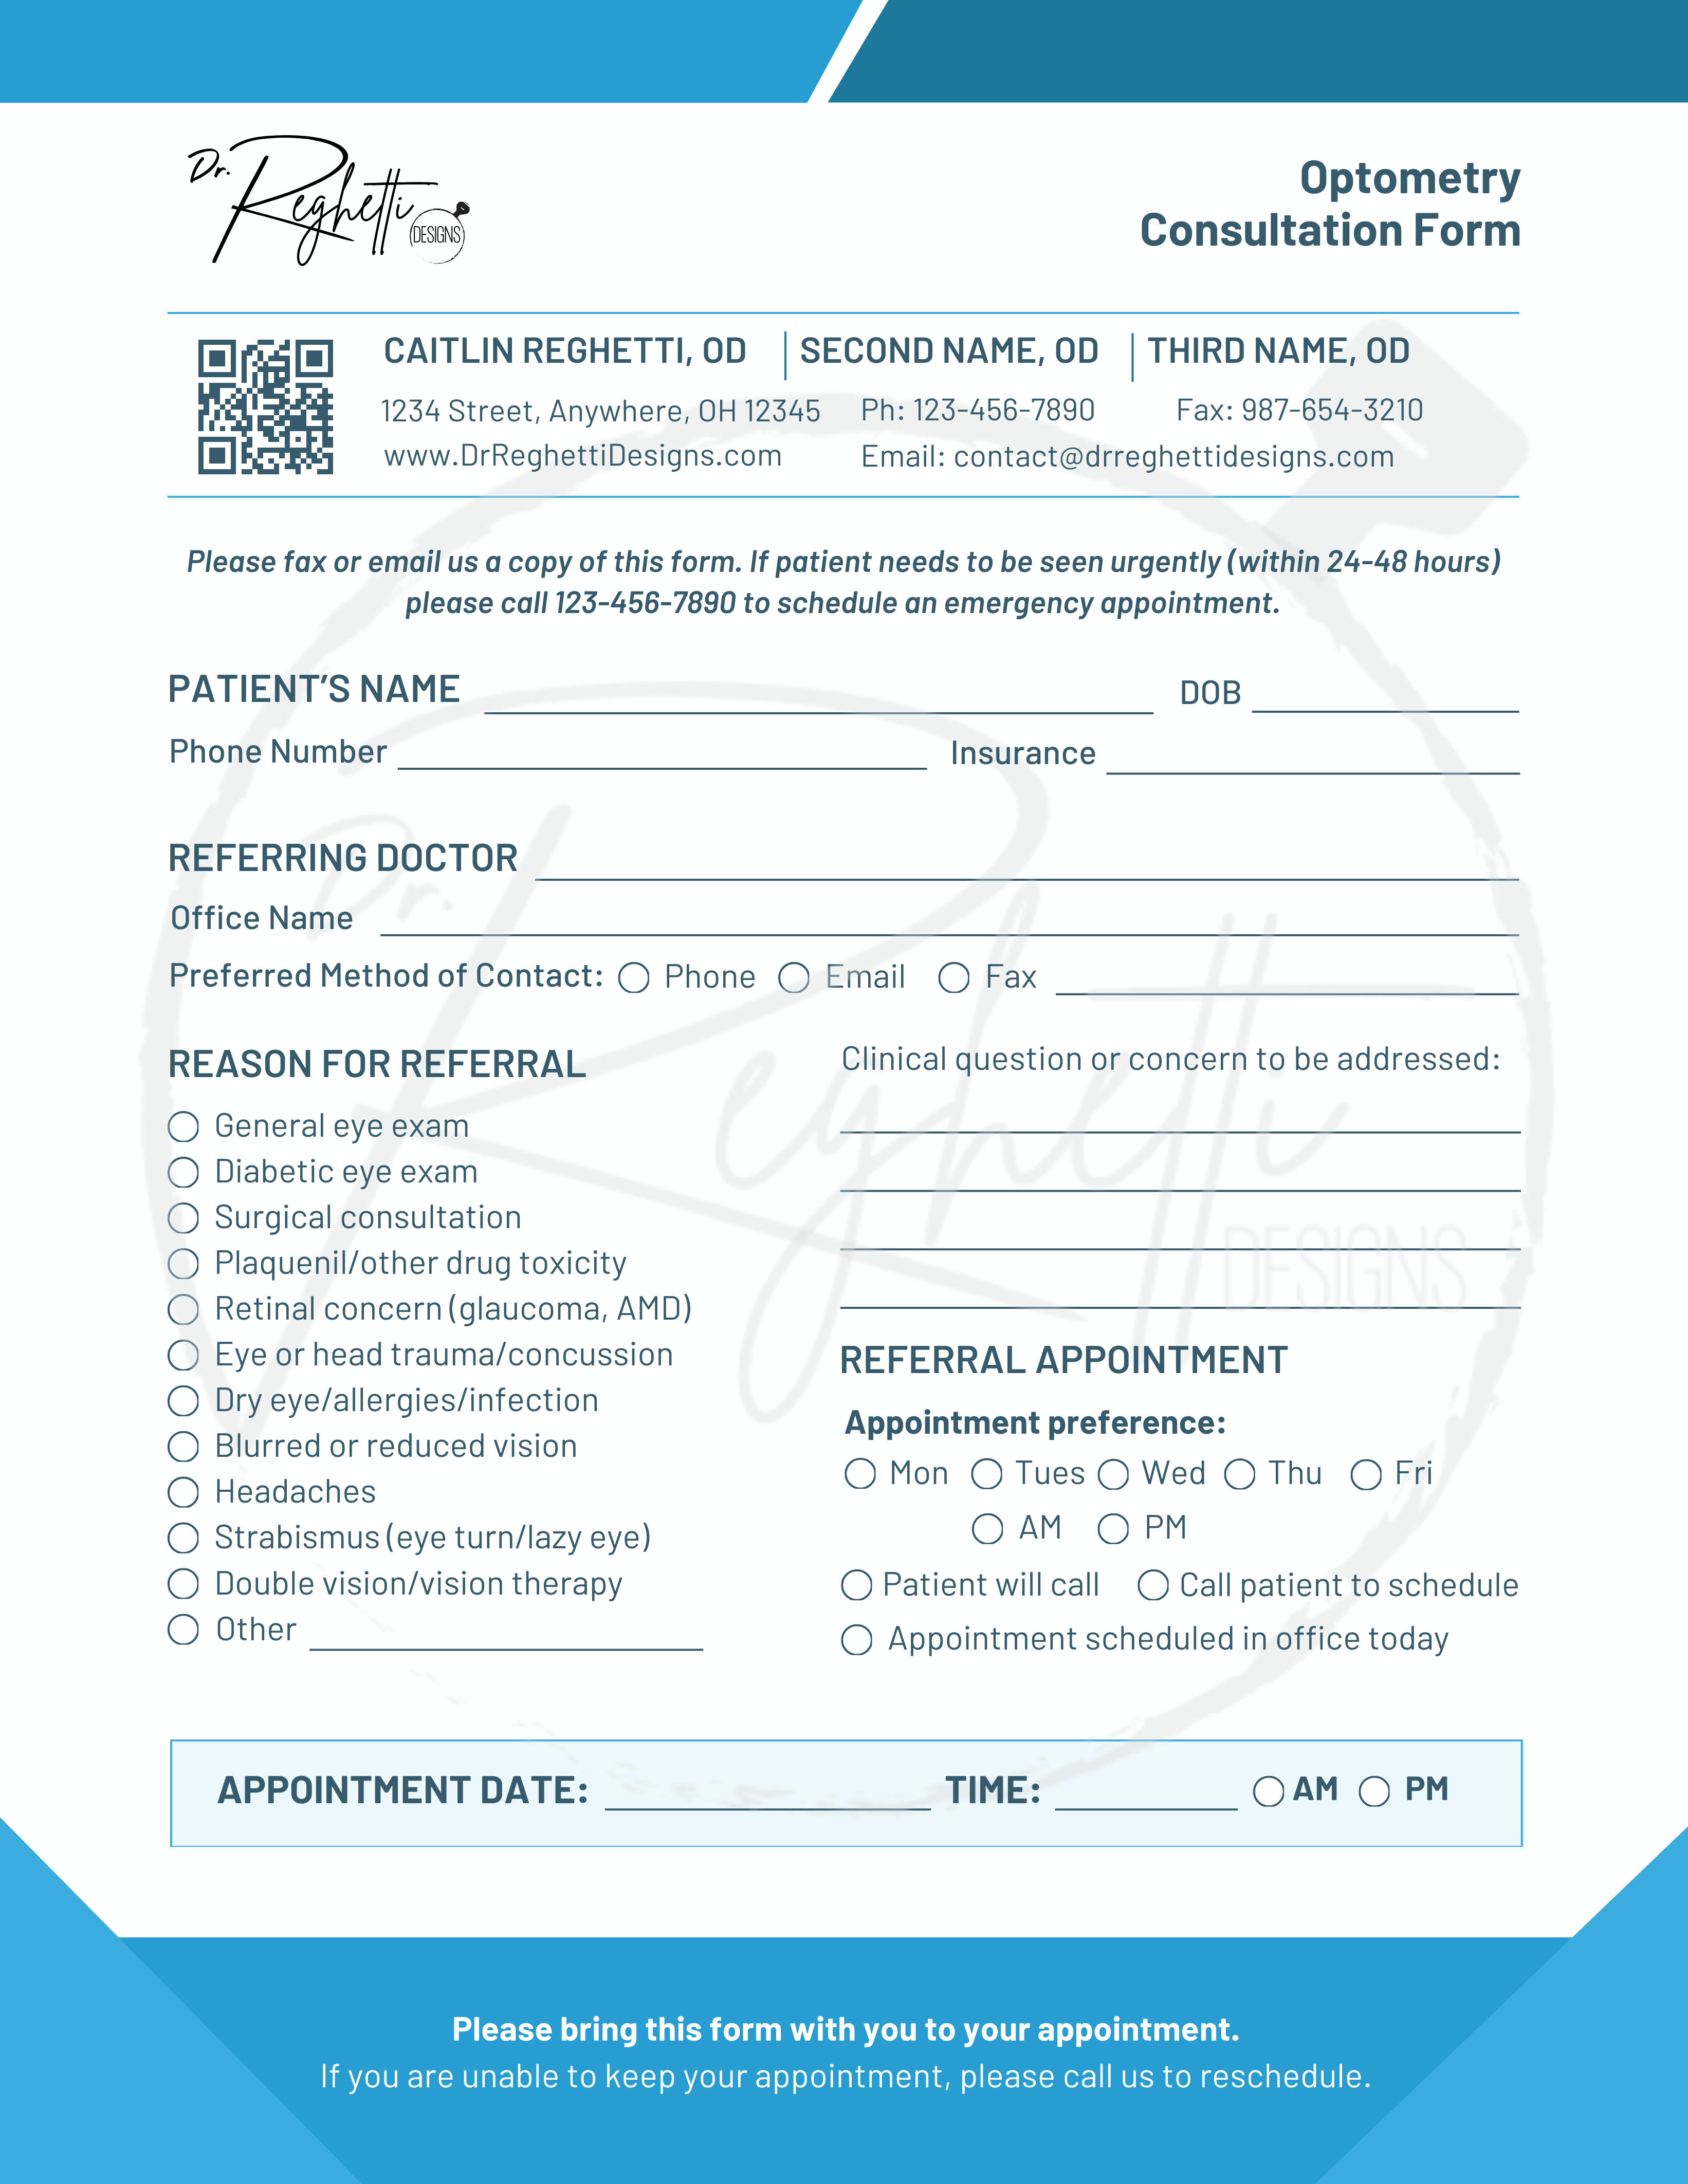 referral forms for optometric consultation endocrinology primary care